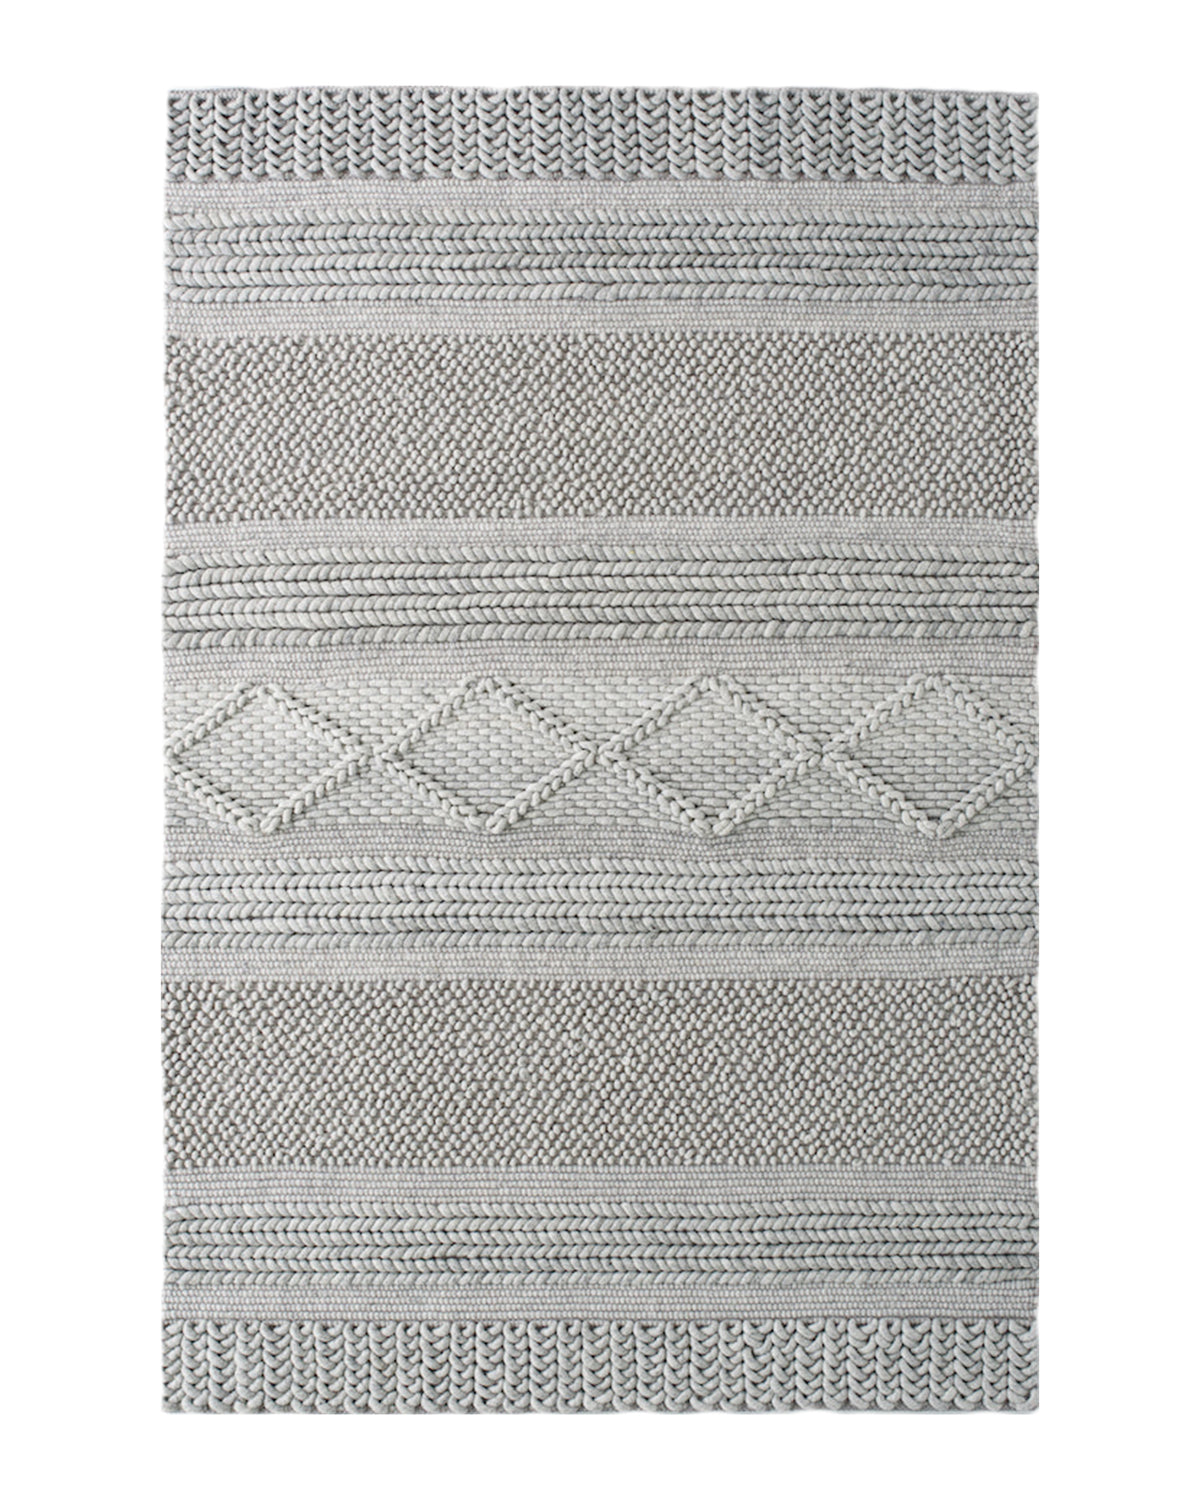 The Jasper Knit is as luxurious as it looks, lovely underfoot and soft to touch. It will bring warmth, texture and interest to any kids' room.  The chunky knit wool rug is like a warm wooly jumper for your floor making a beautiful, elegant and welcoming statement.